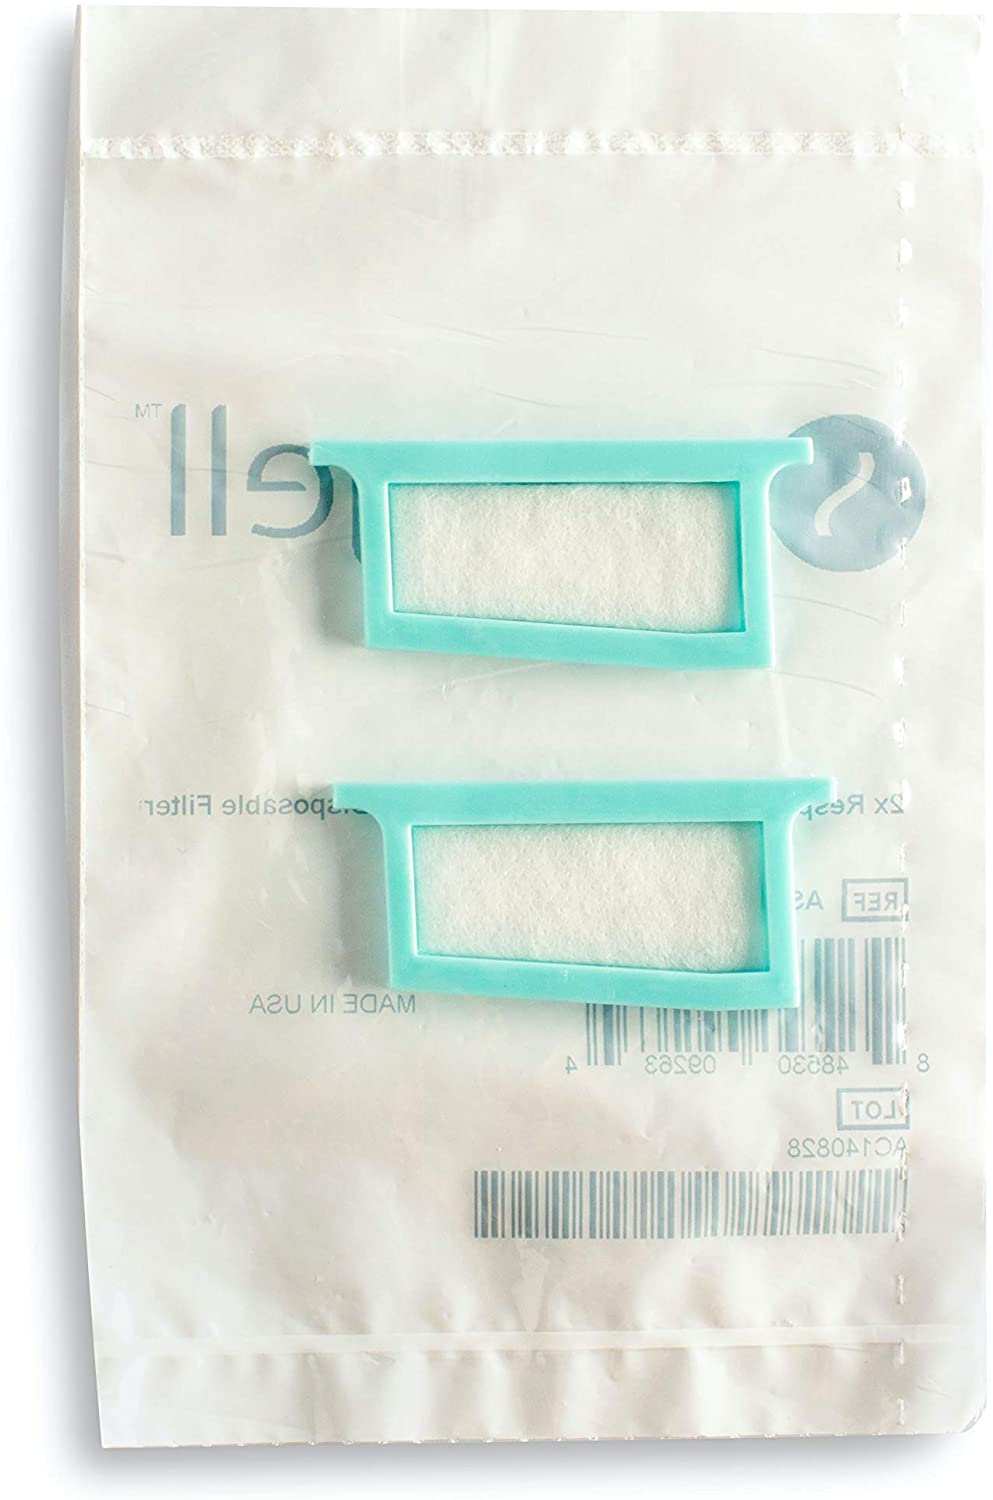 2 Filters Inside Of Bags.